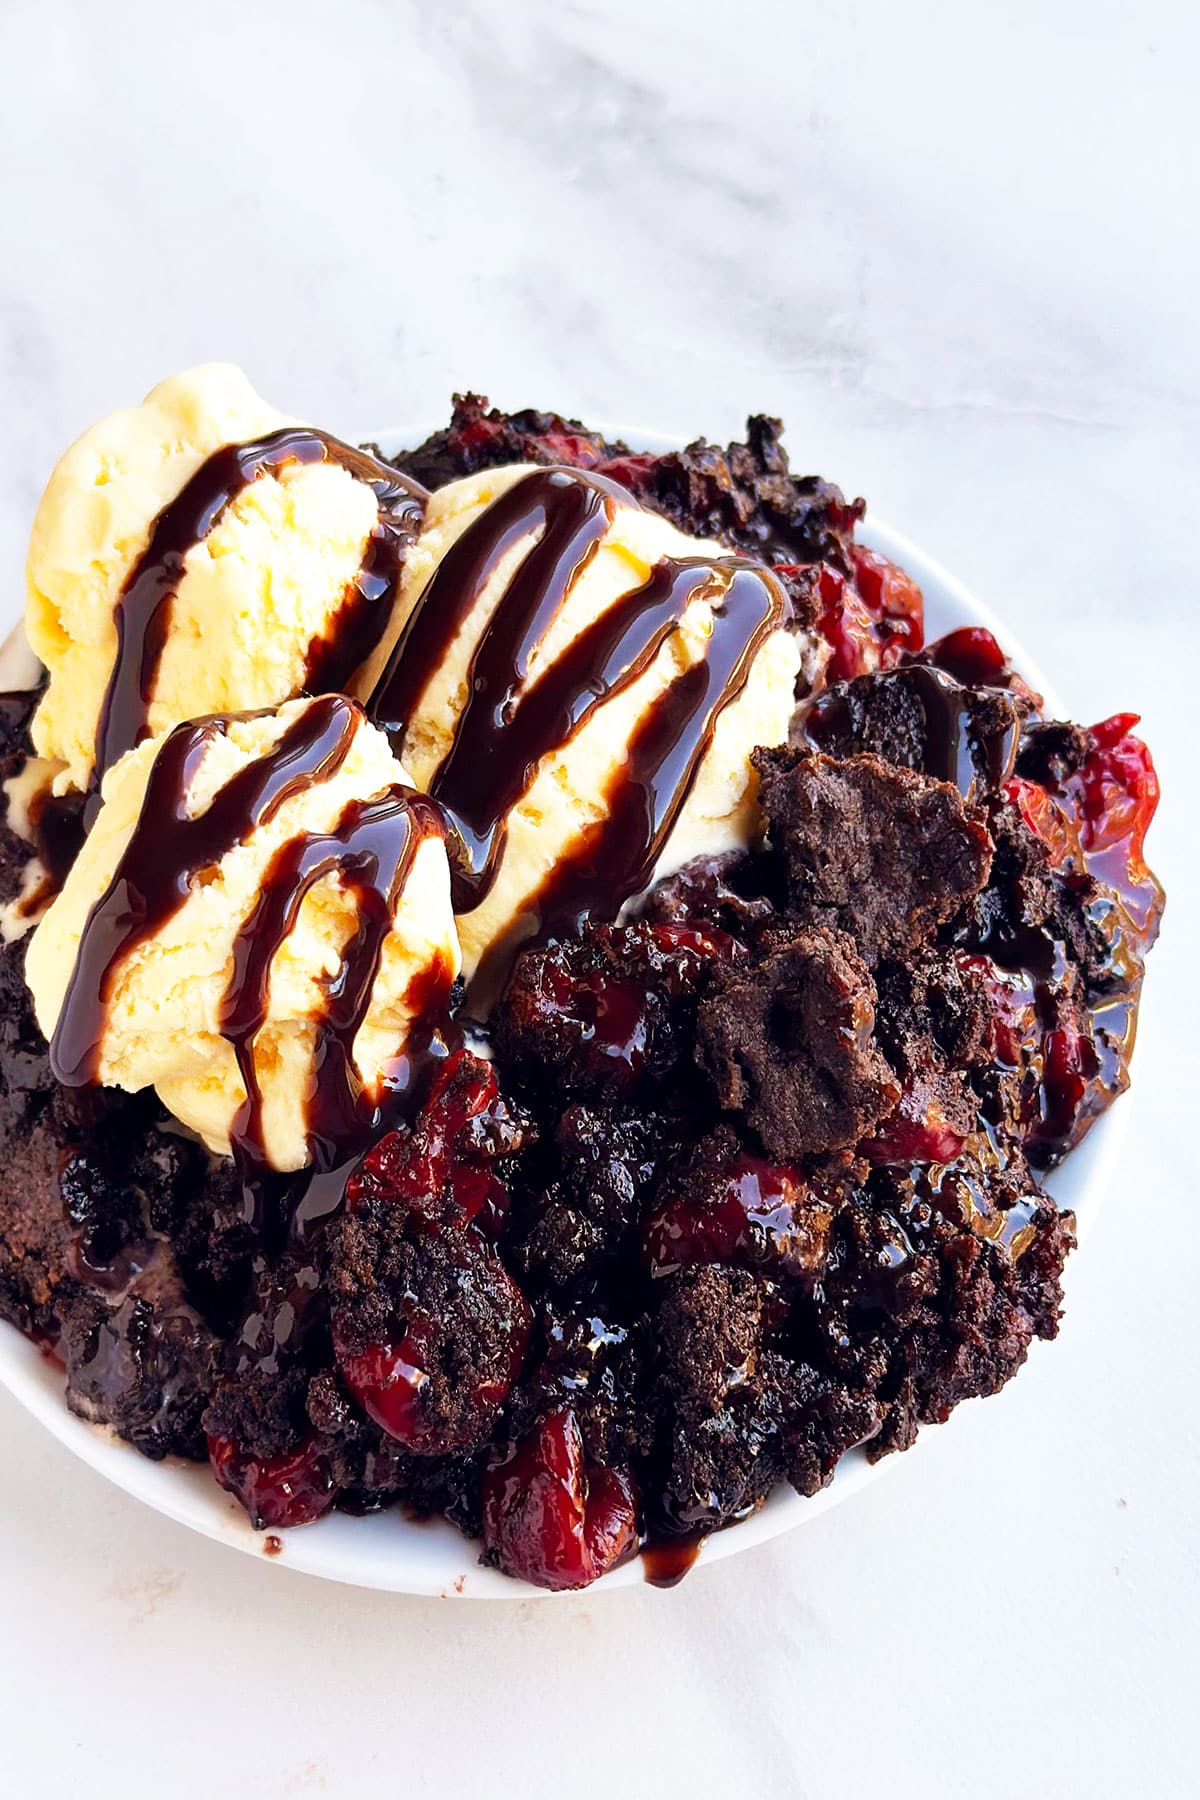 Easy Chocolate Cherry Dump Cake With Cake Mix Topped With Ice Cream on White Dish 